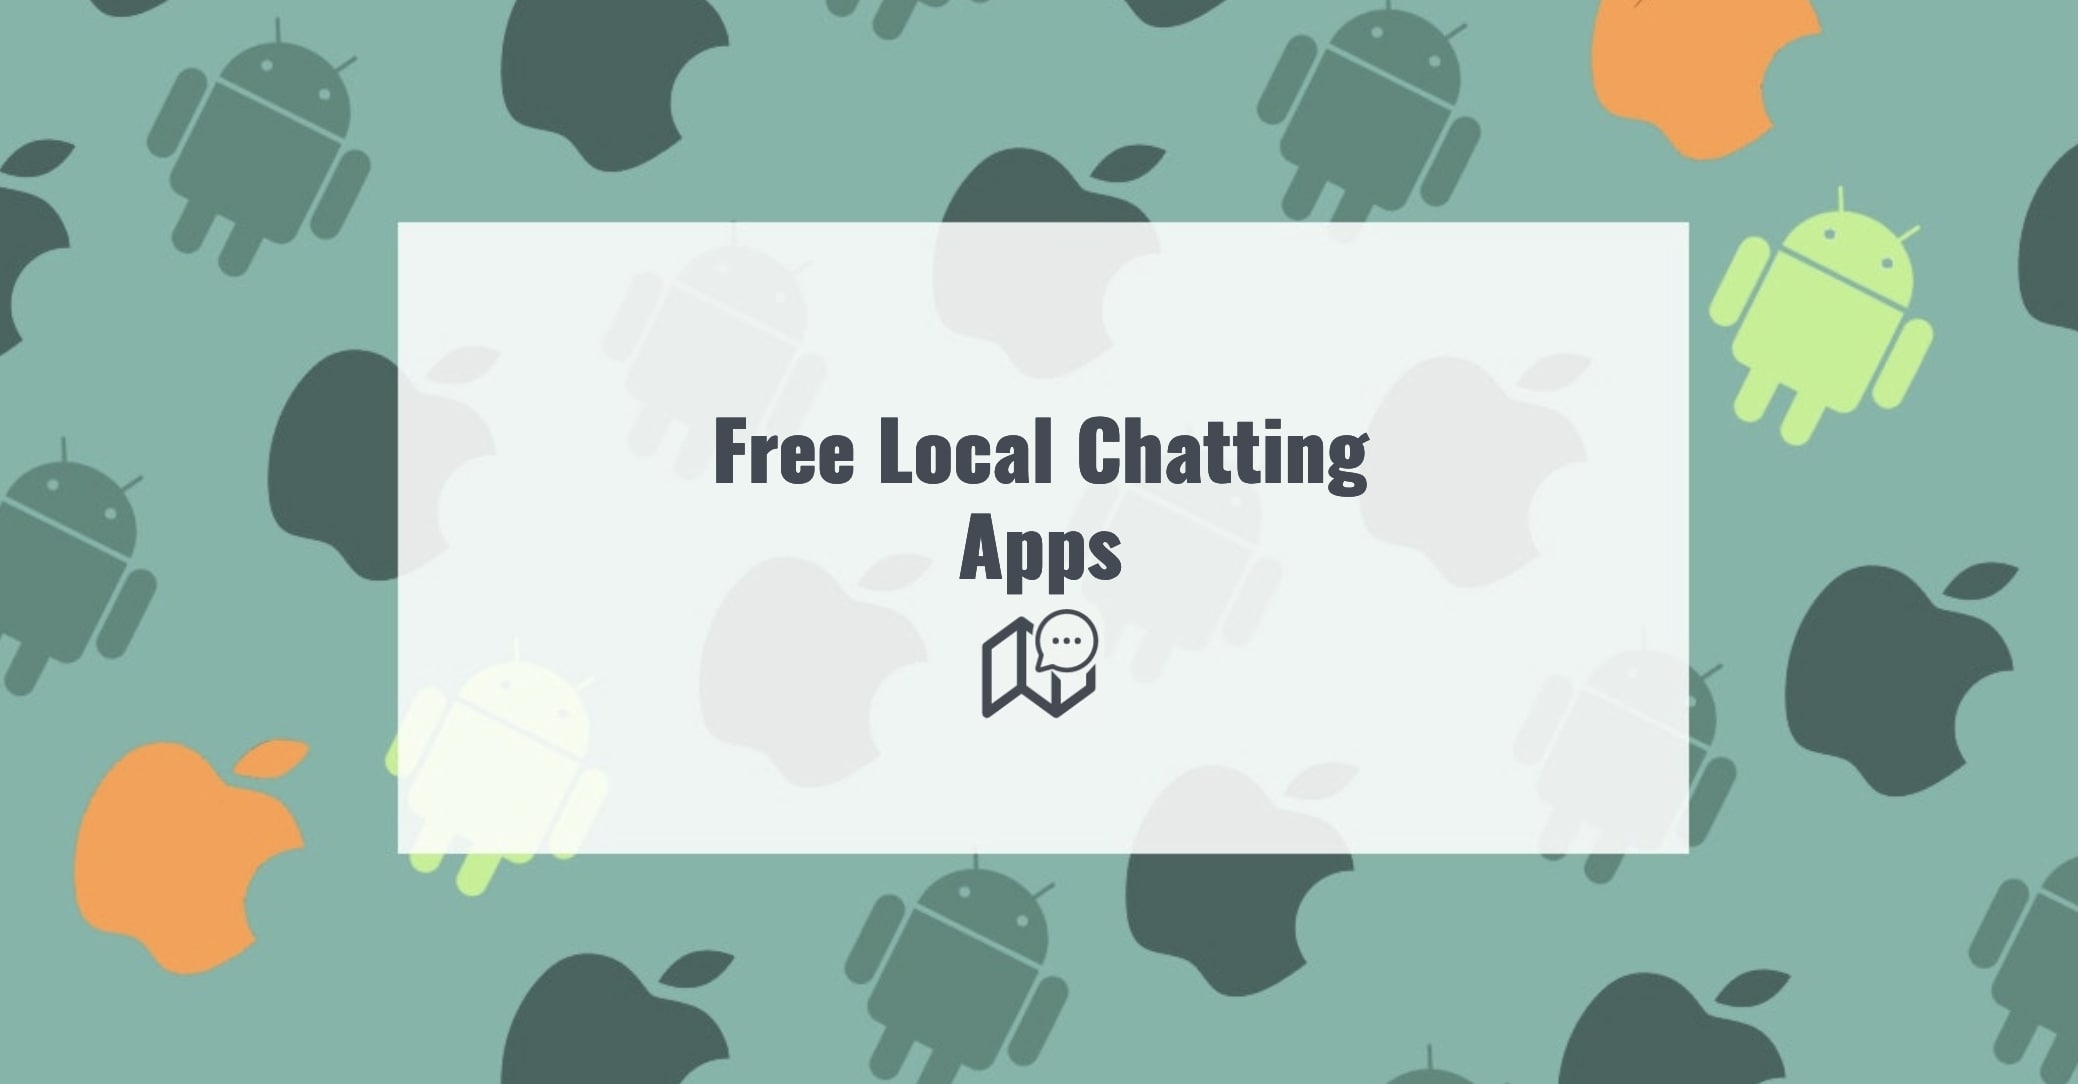 15 Free Local Chatting Apps for Android & iOS - Apps Like These. Best Apps for Android, iOS, and Windows PC